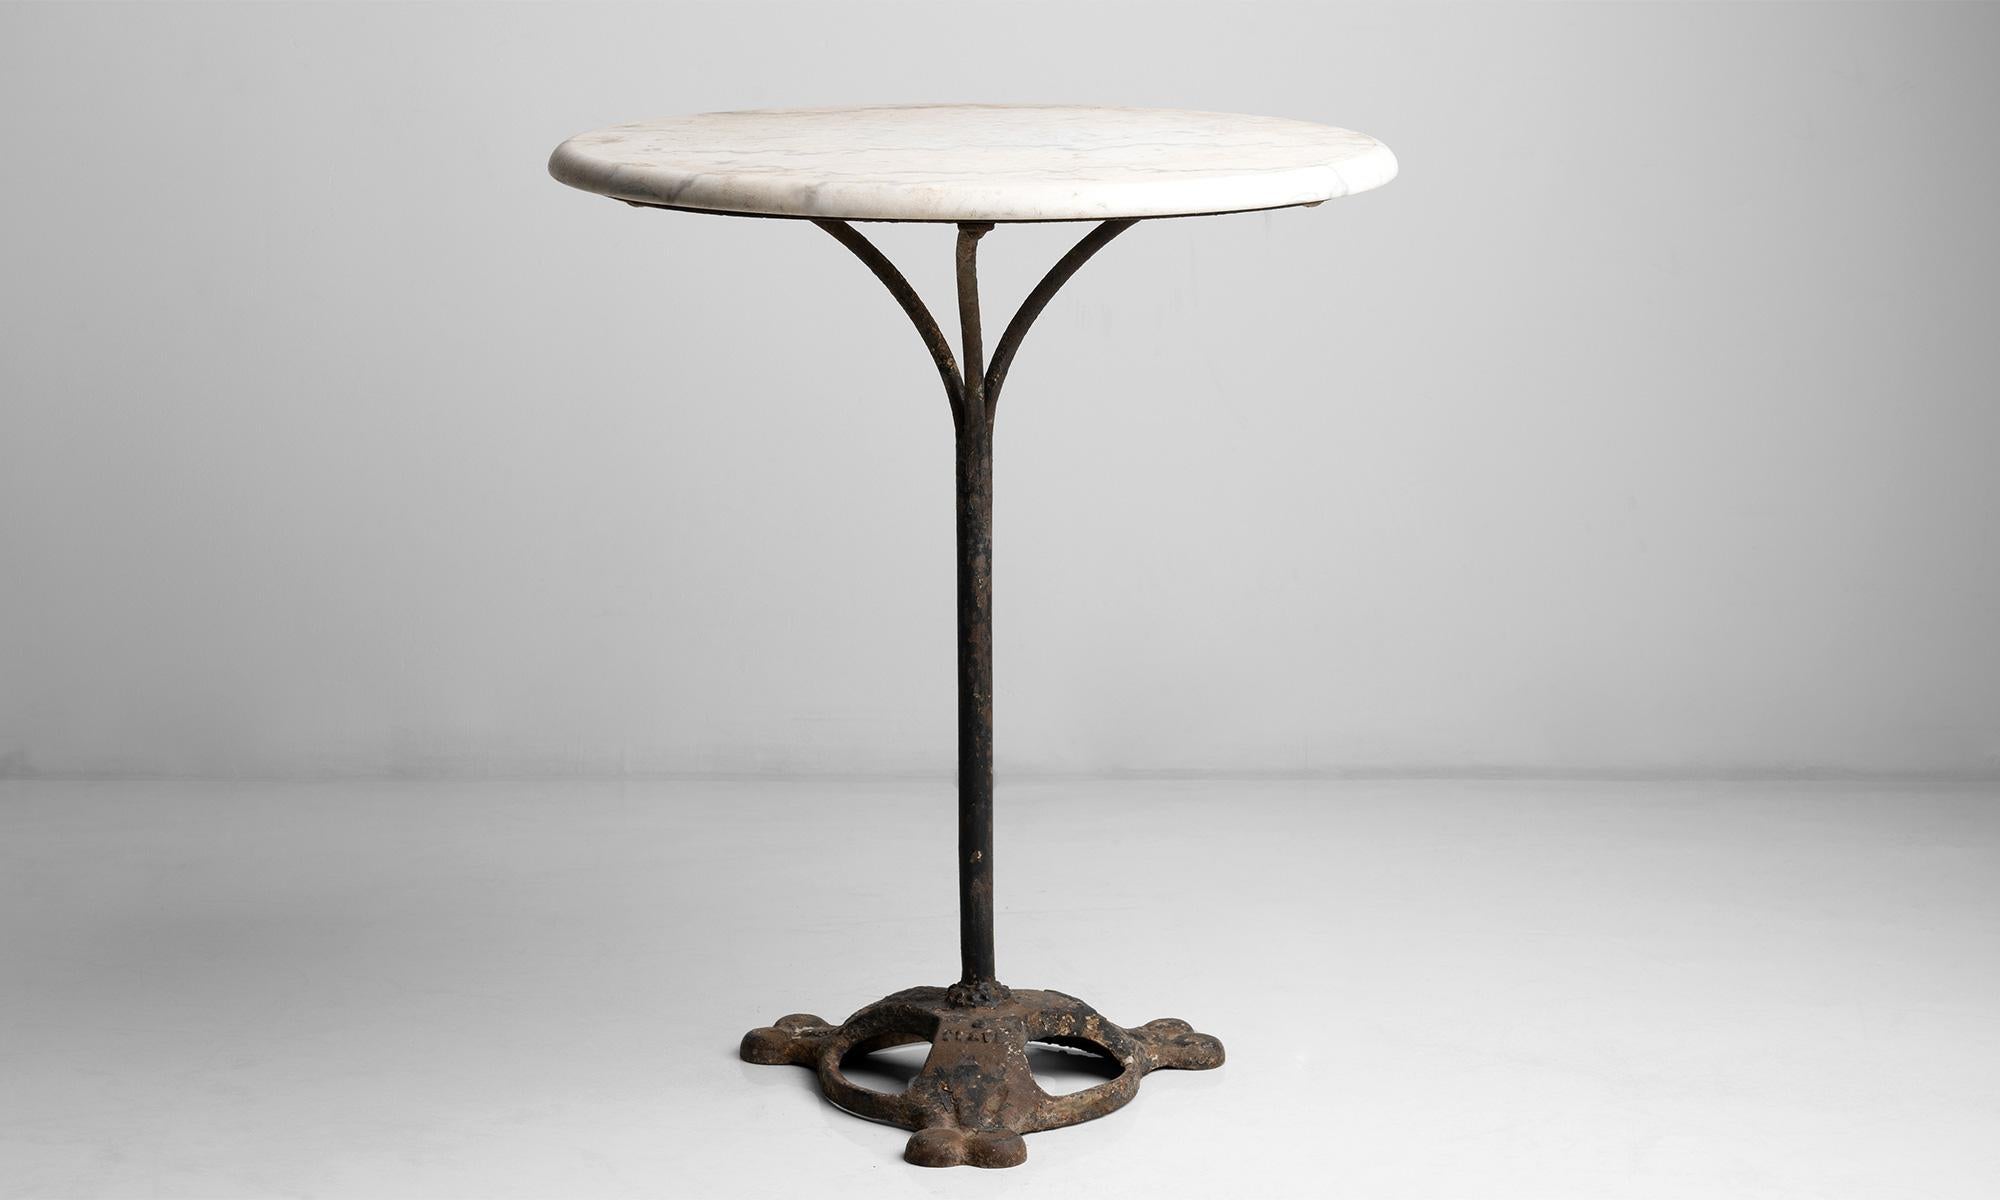 Marble top bistro table.

France, circa 1890.

Marble top garden bistro table with iron stem and feet.

23.5”diameter x 27.5”height.